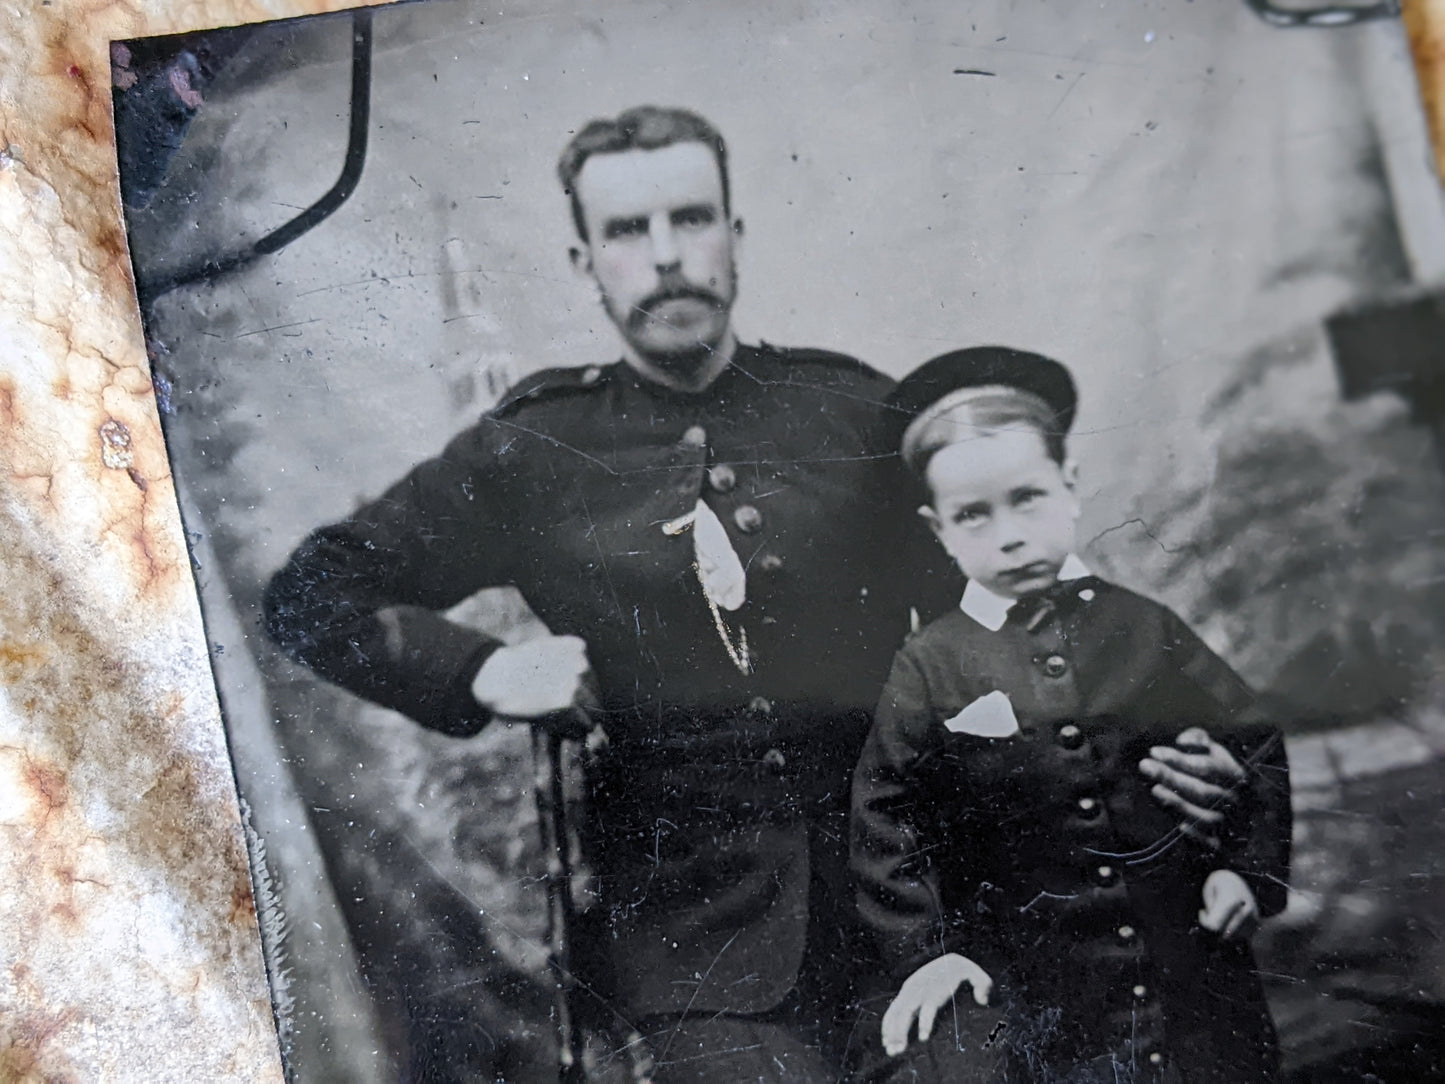 Vintage Tintype Father & Son Gangs of New York